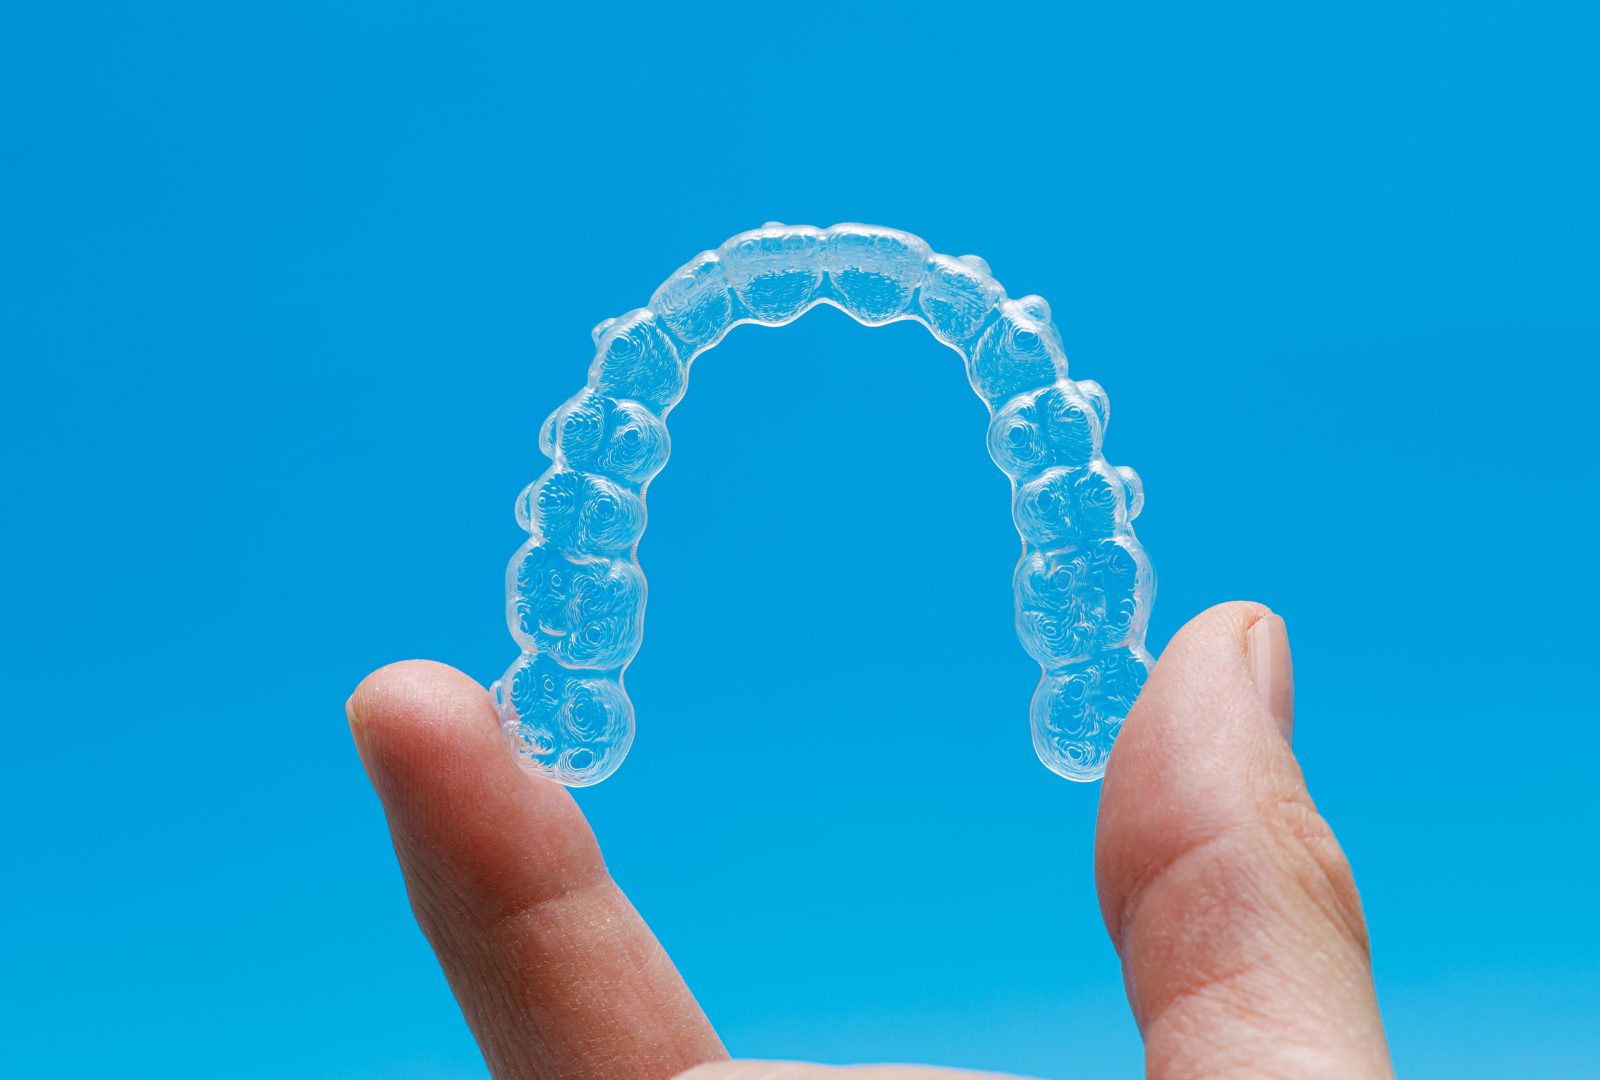 Getting started with Invisalign